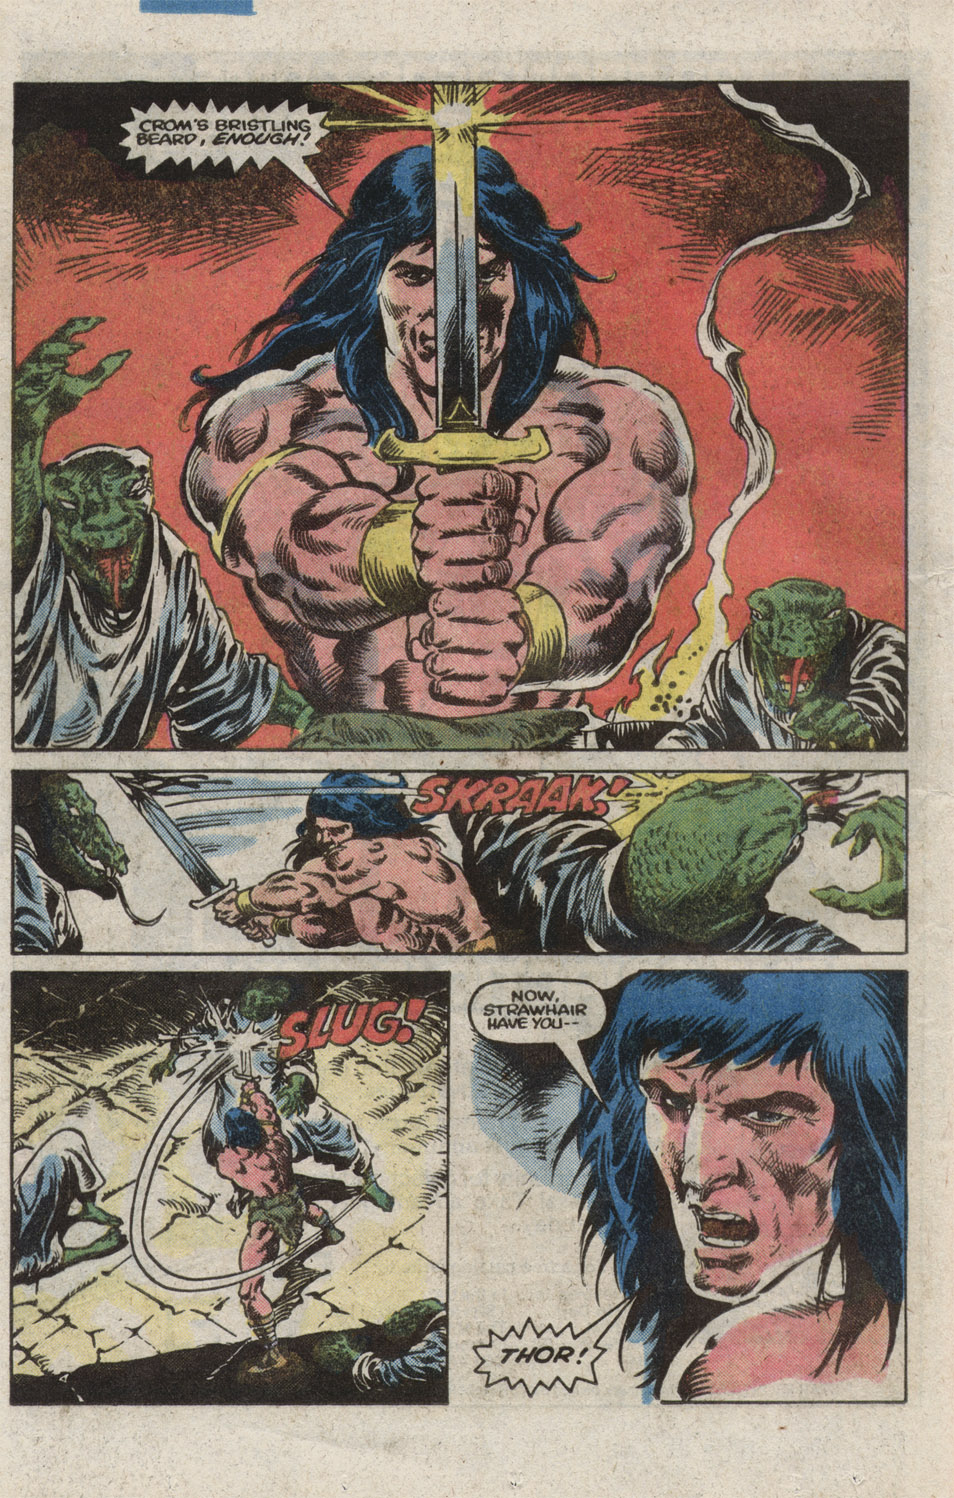 What If? (1977) issue 39 - Thor battled conan - Page 40